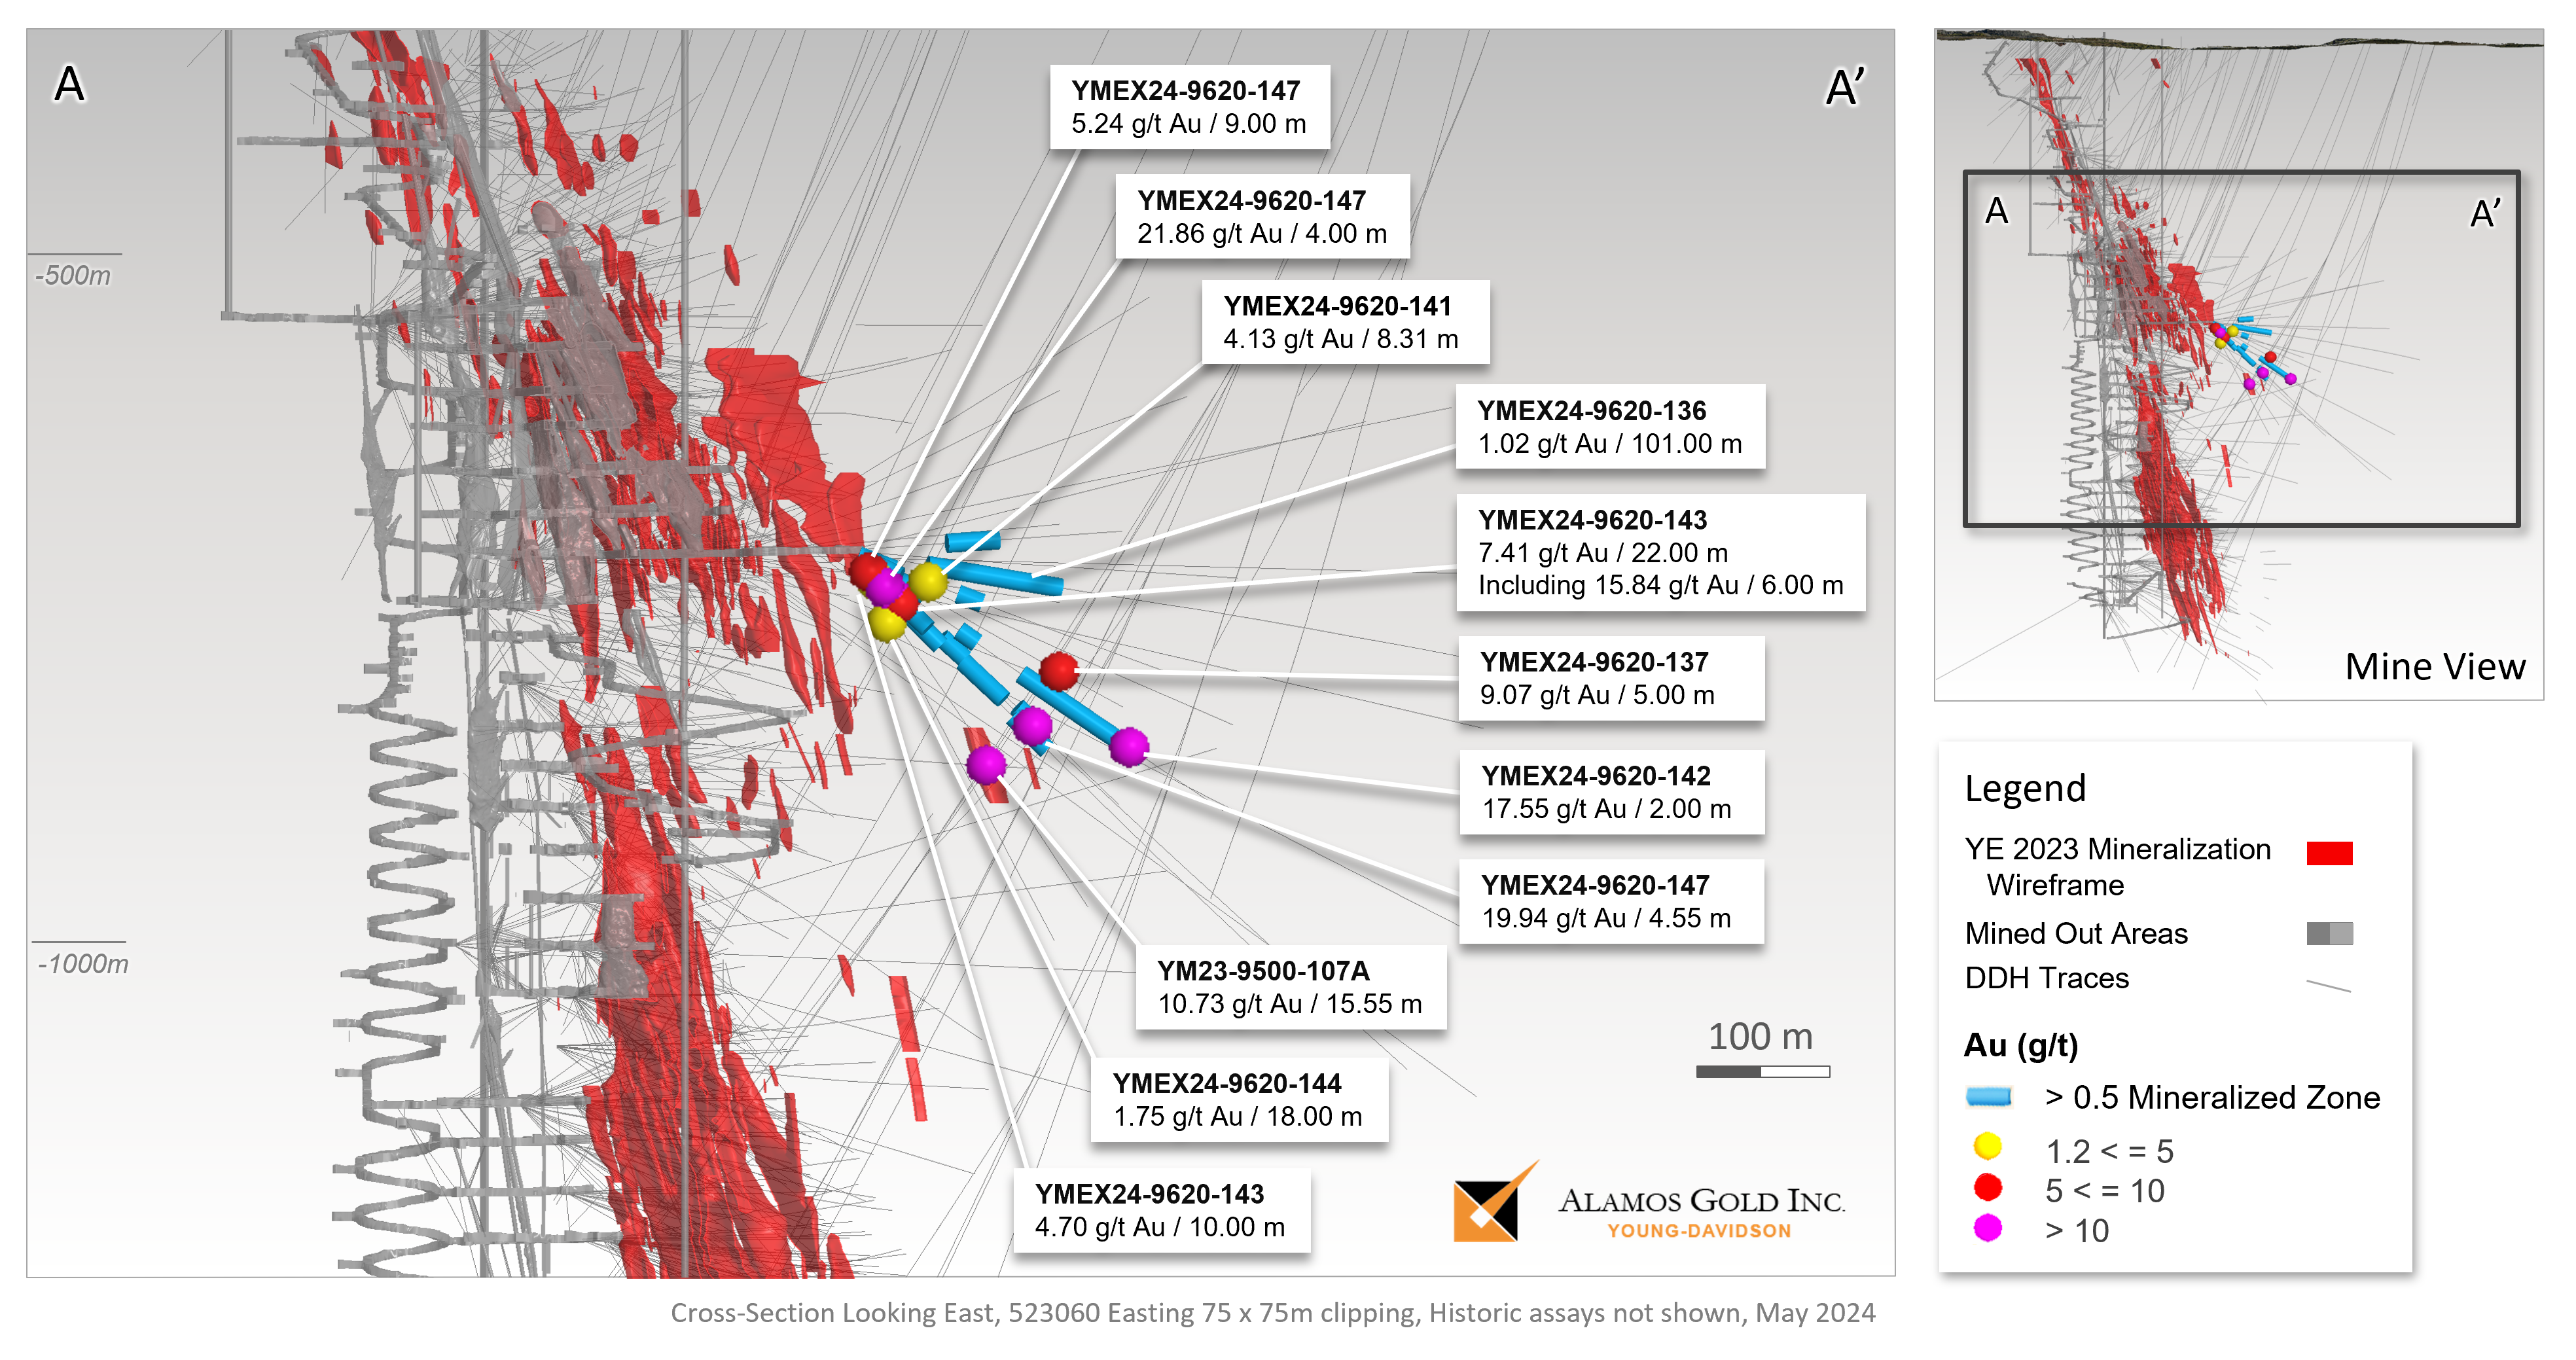 Figure 2 Young-Davidson Mine Cross Section – 9620 & 9500-Level Exploration Drill Holes & Significant Composites